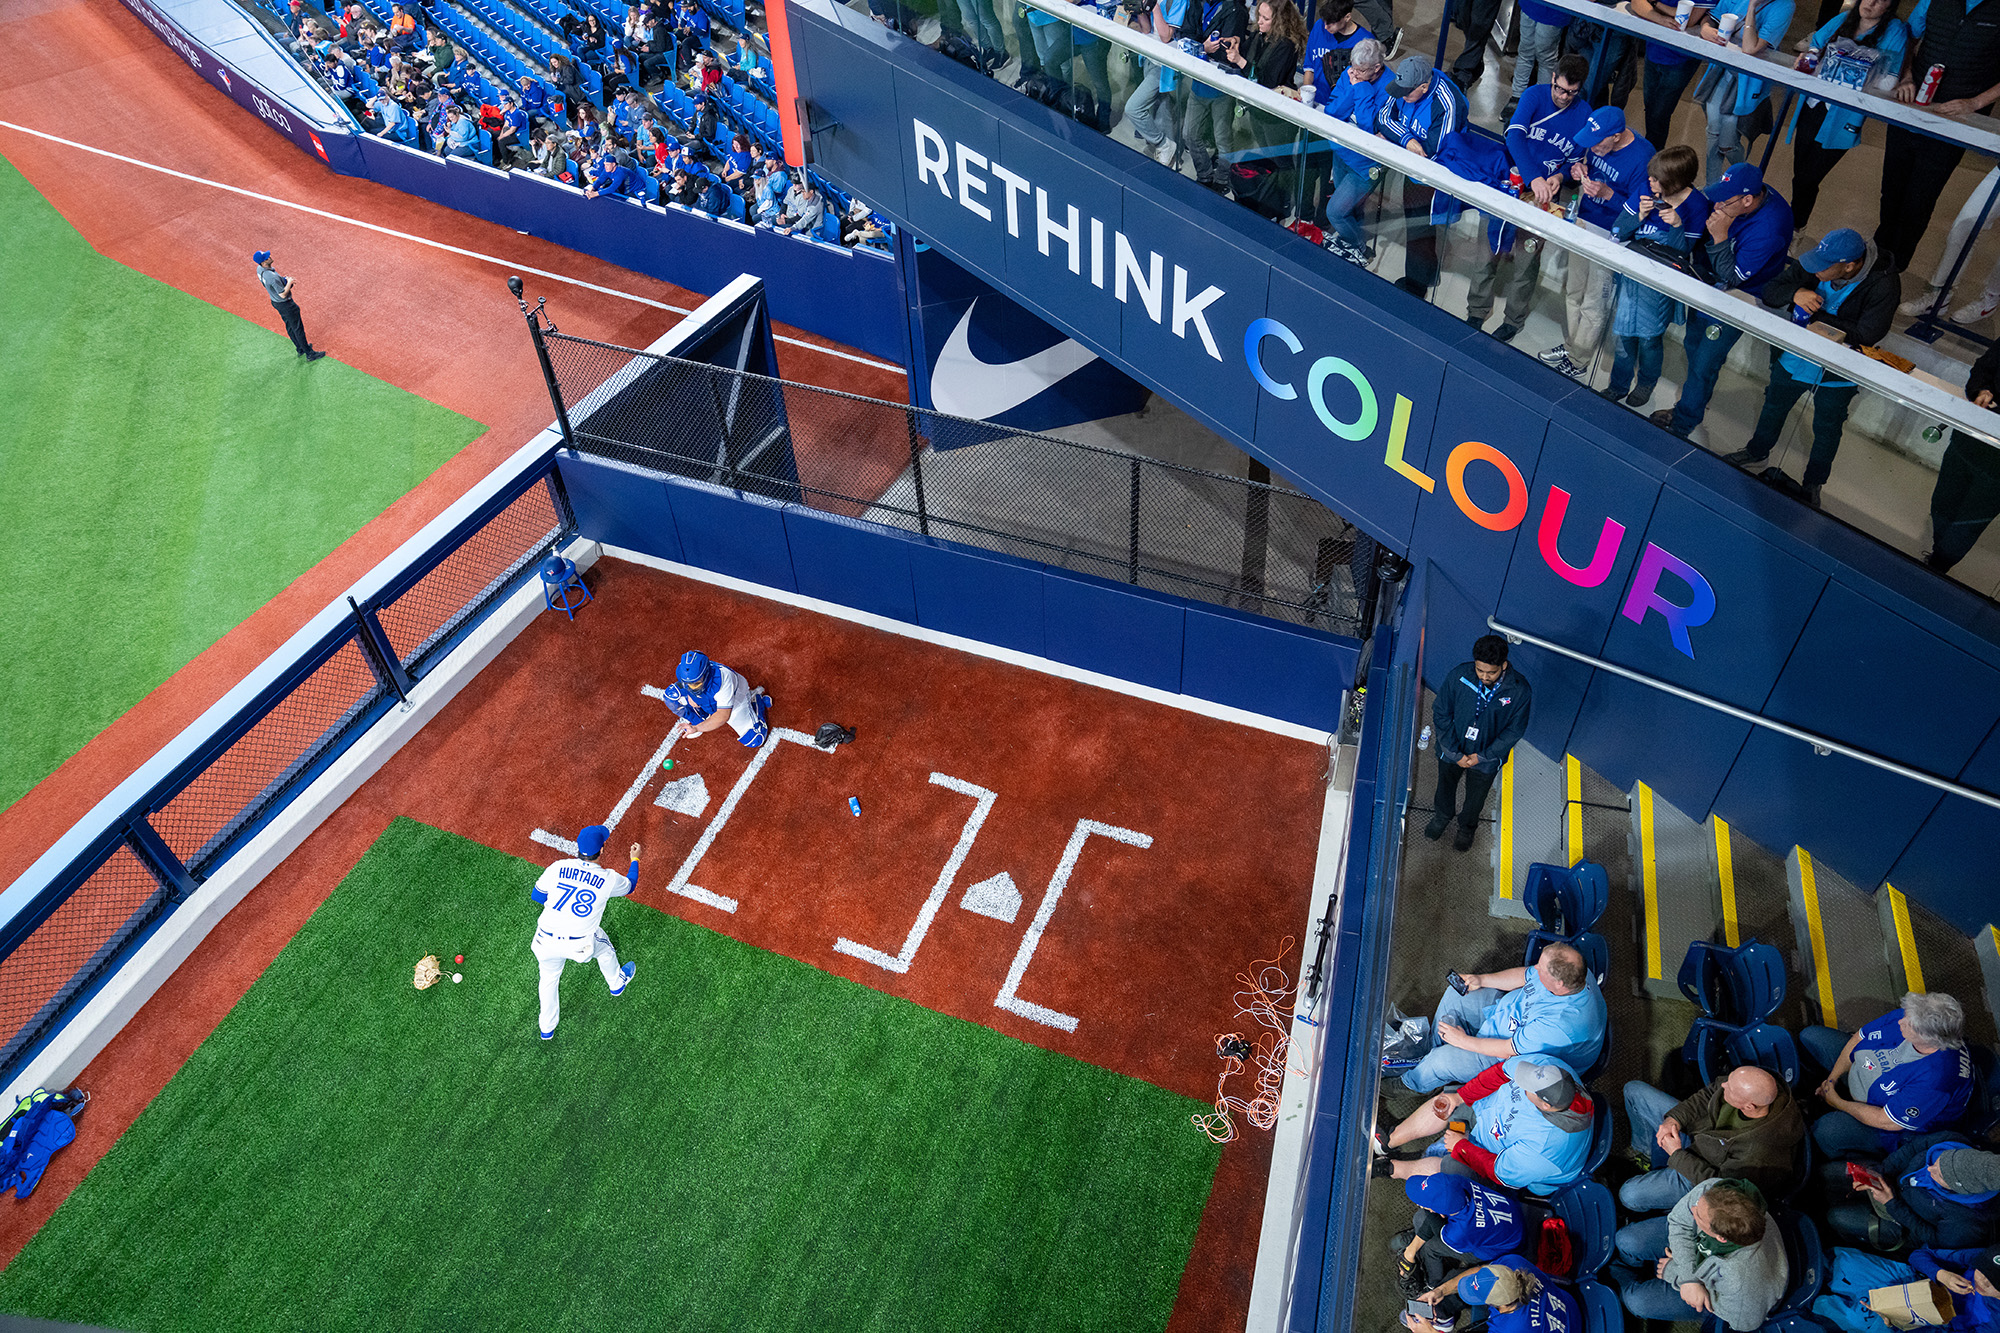 More Rogers Centre upgrades unveiled by Blue Jays - Ballpark Digest